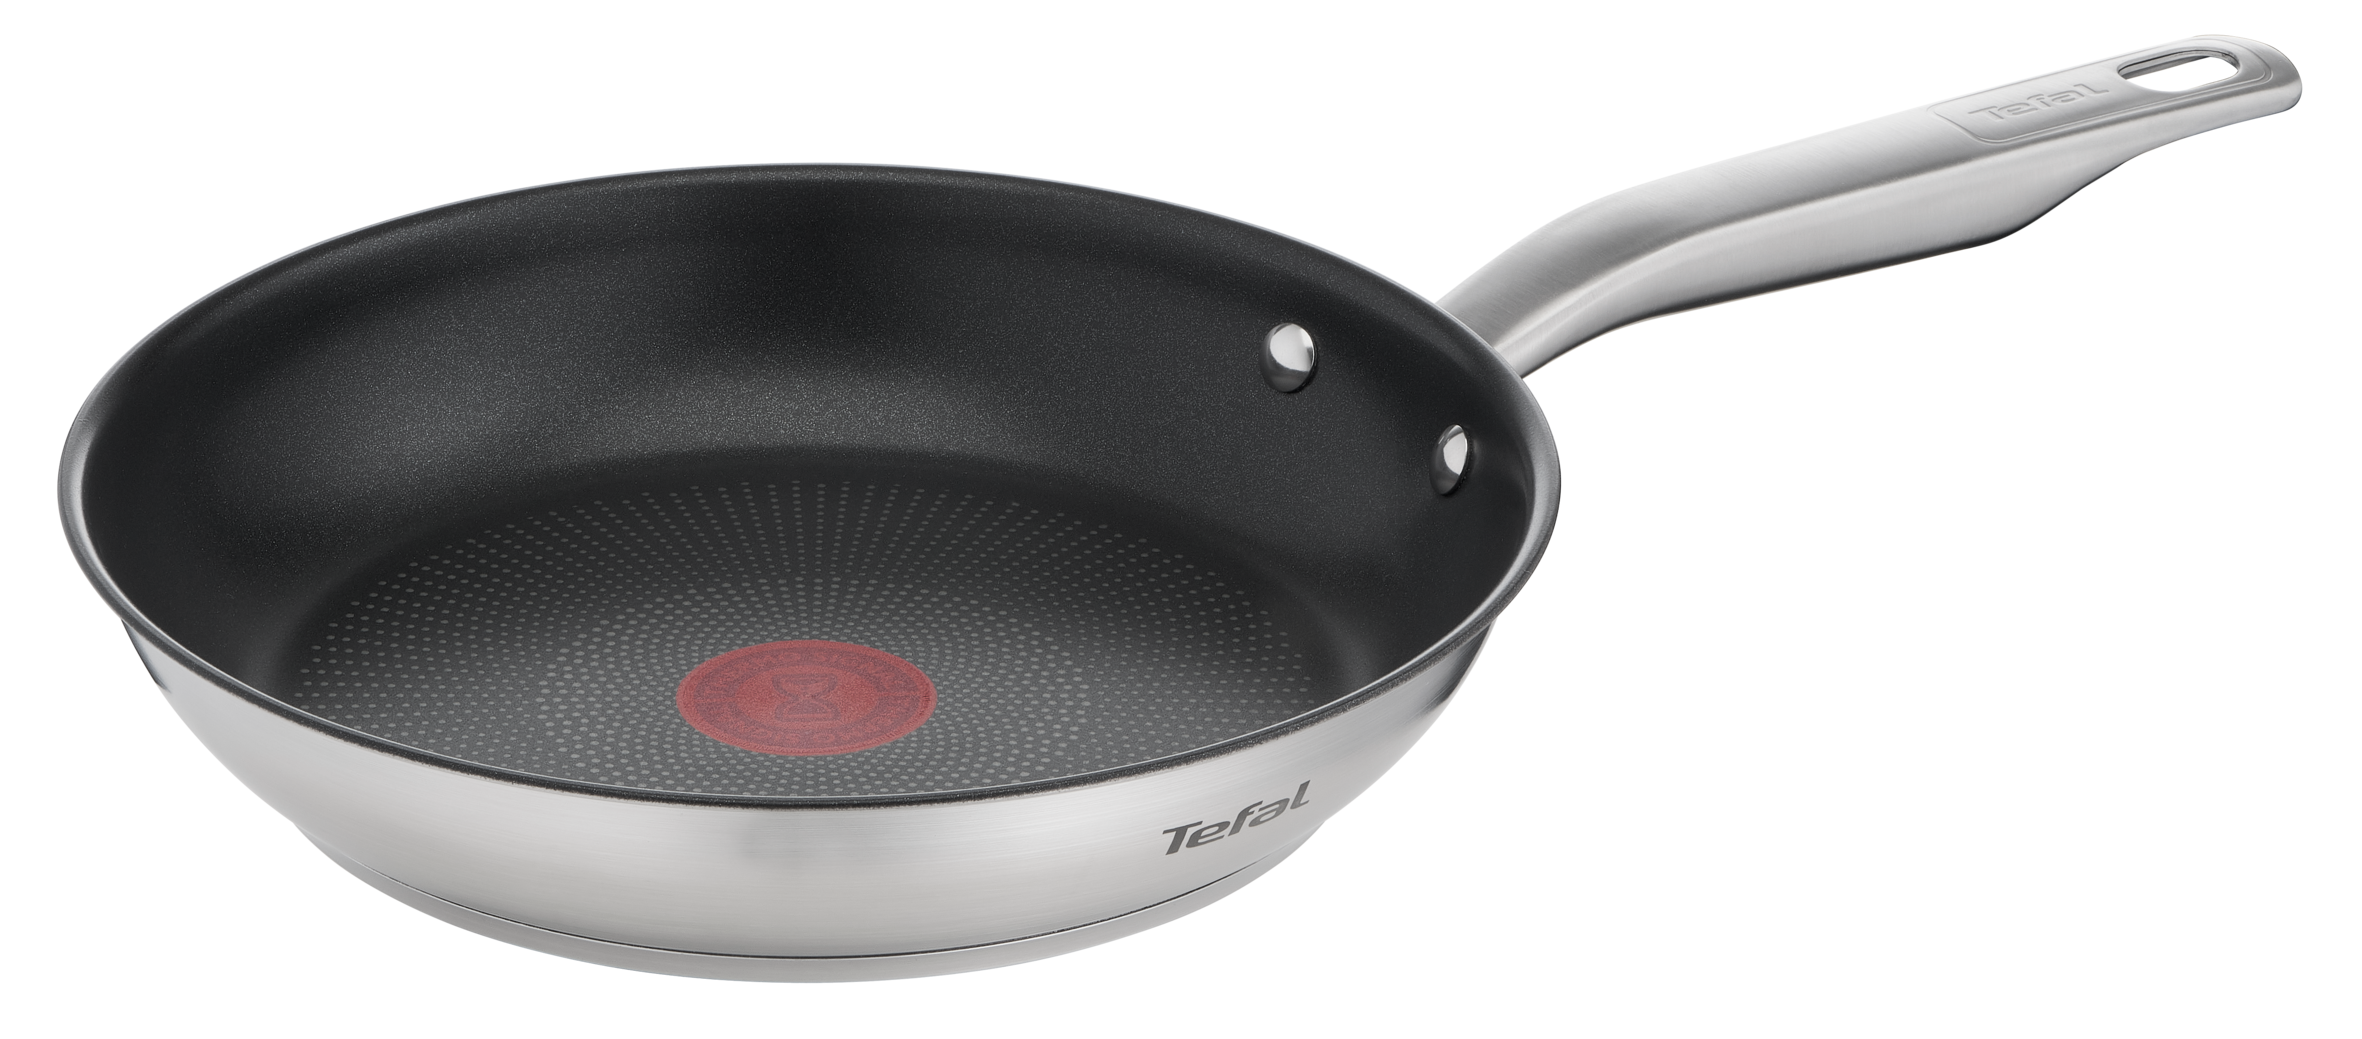 Tefal Virtuoso Stainless Steel Induction Frypan 24cm